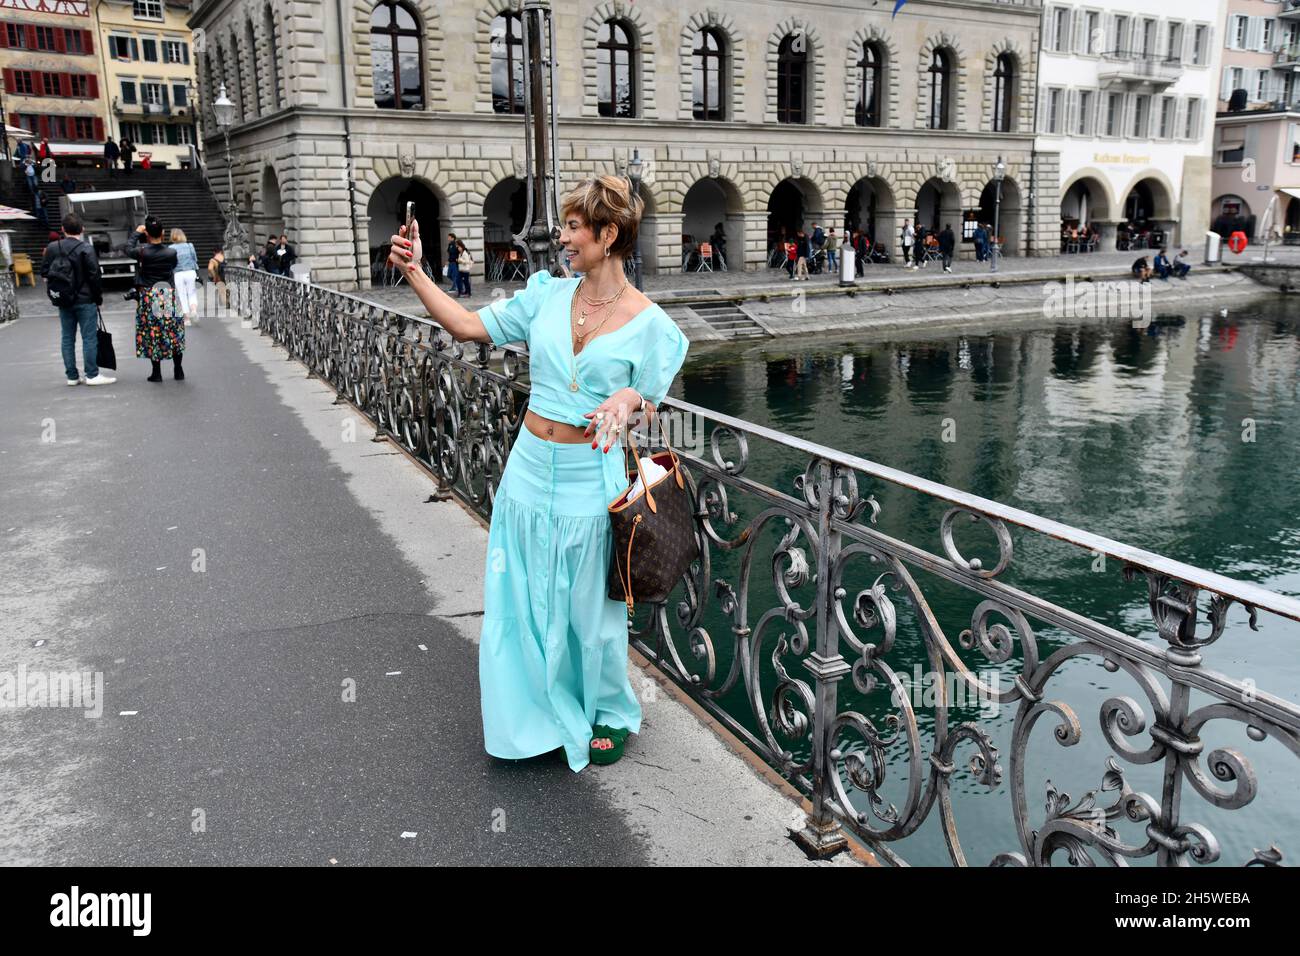 Glamorous lady taking a selfie photograph in Lucerne, Switzerland Stock Photo